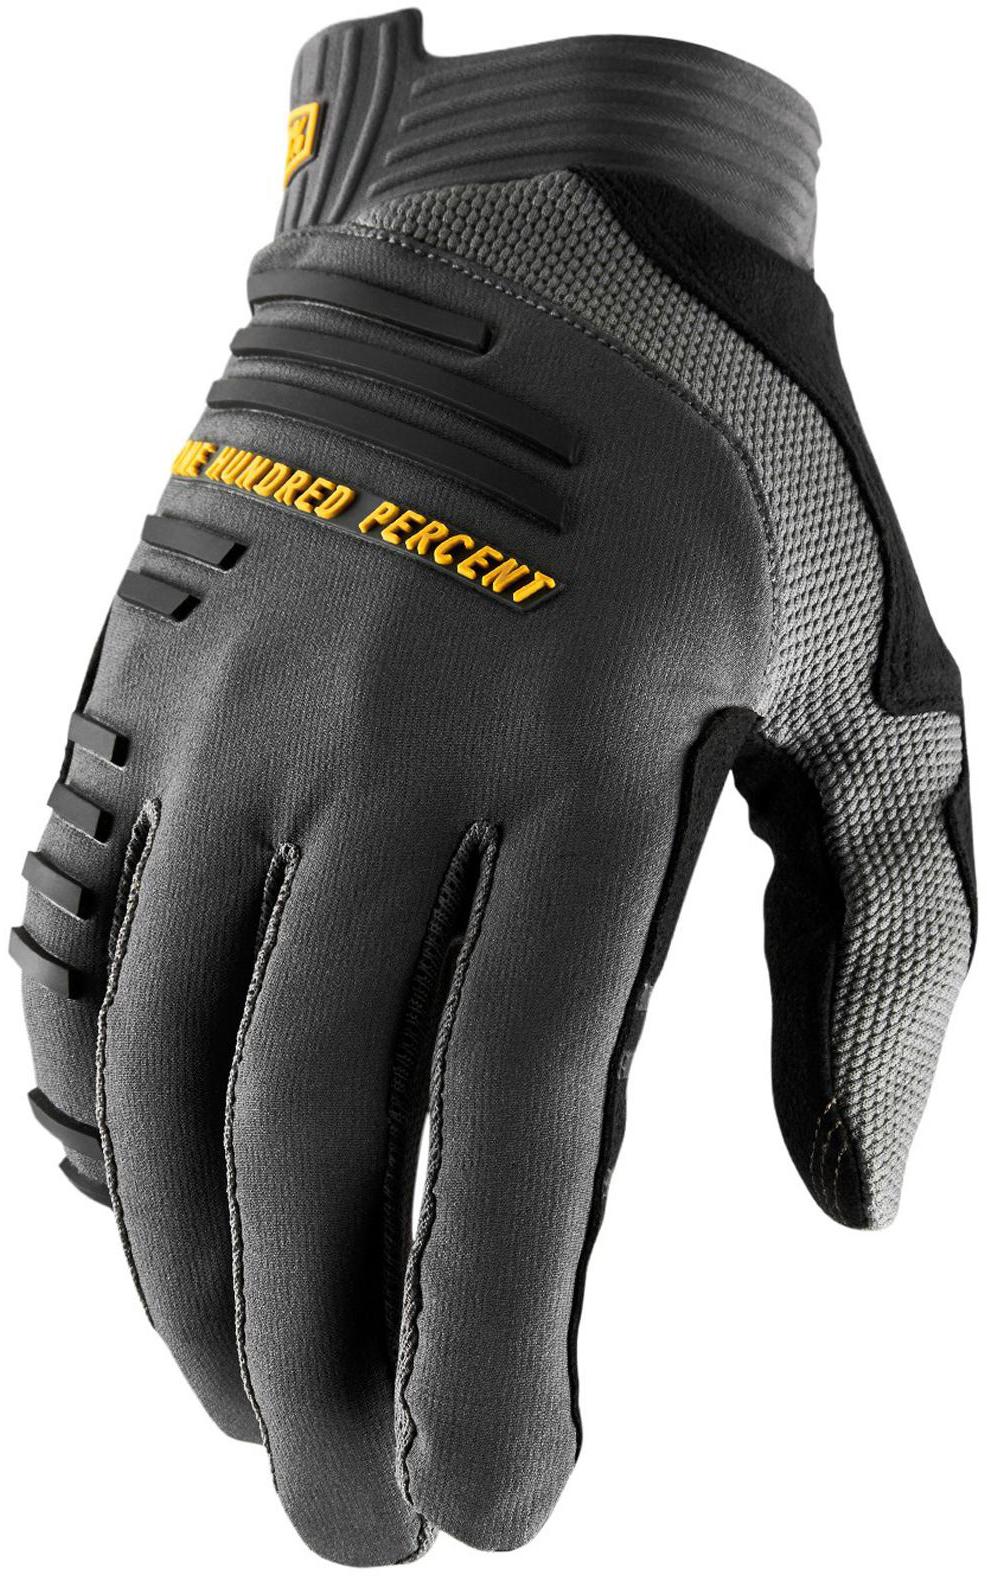 100% R-core Gloves - Charcoal